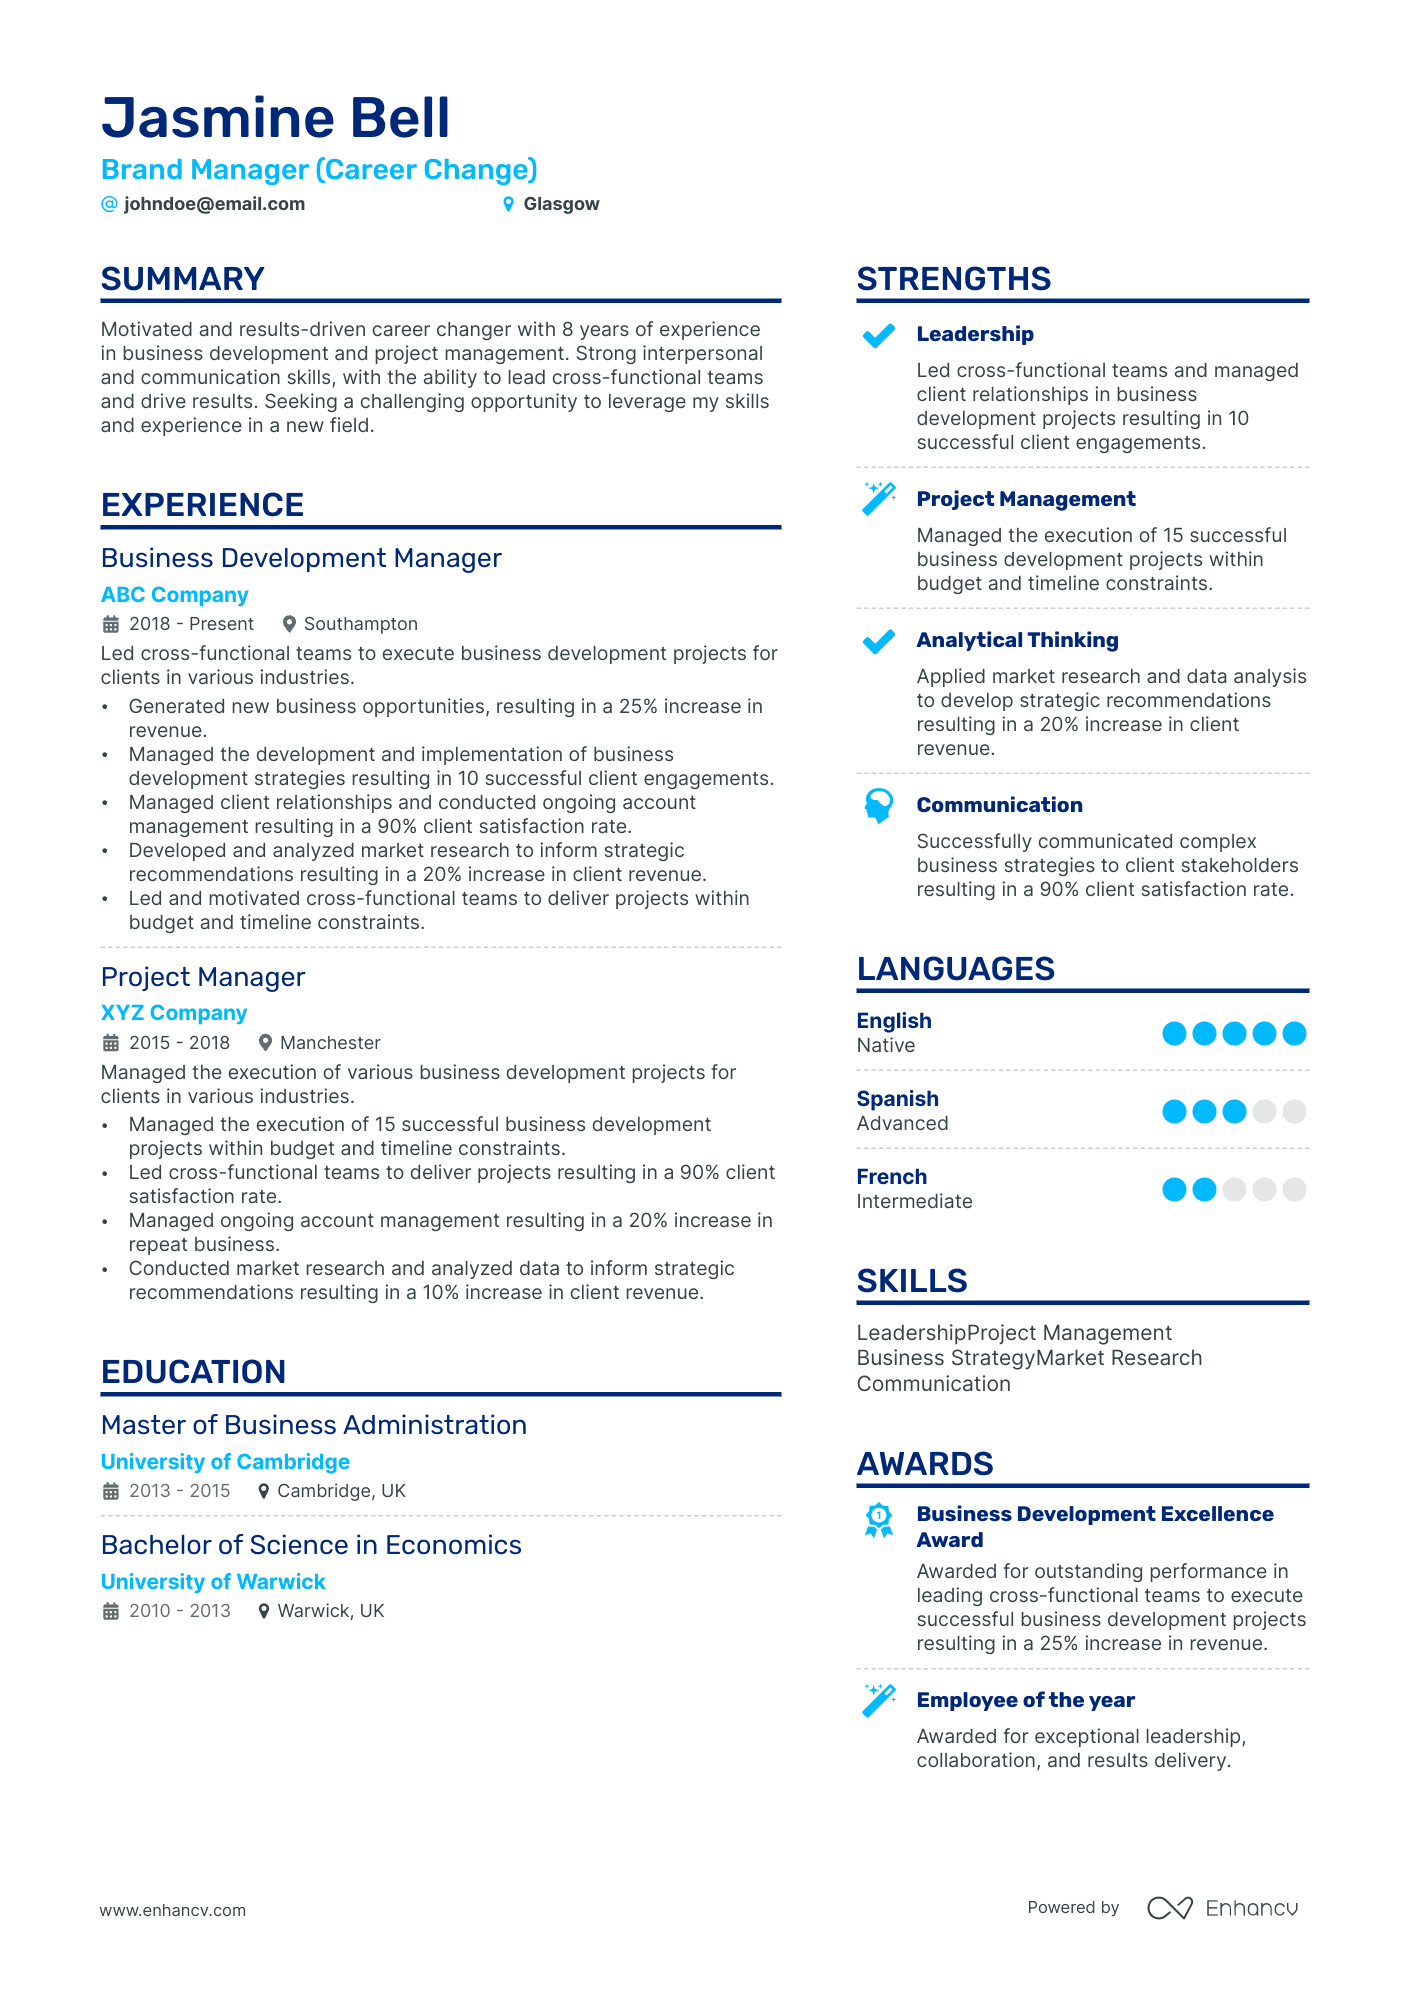 Brand Manager (Career Change) CV example